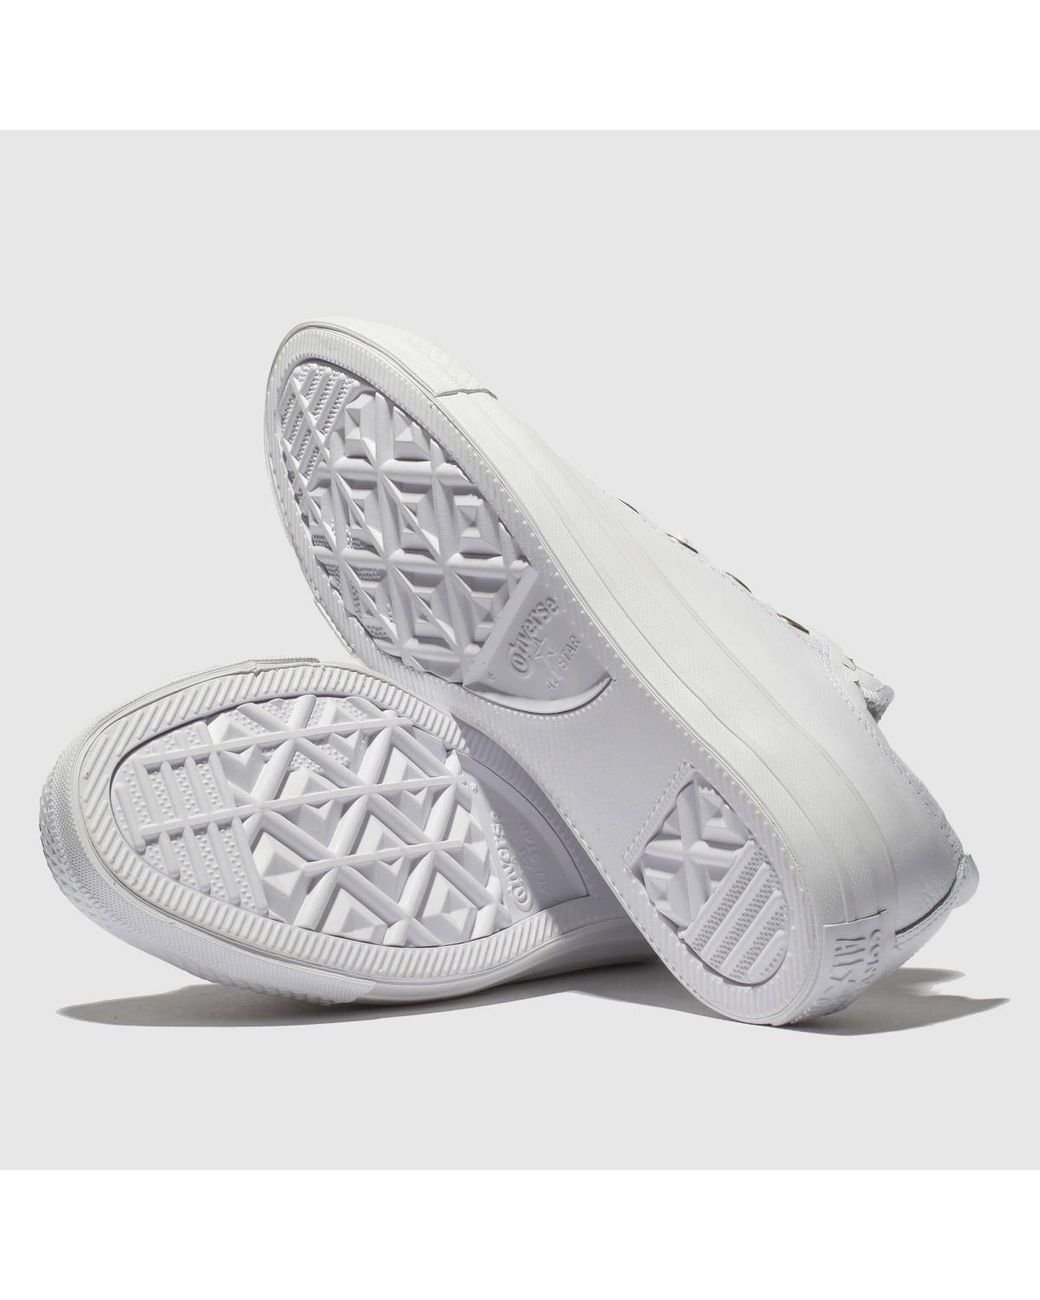 Converse All Star Frilly Thrills Ox Trainers in White | Lyst UK